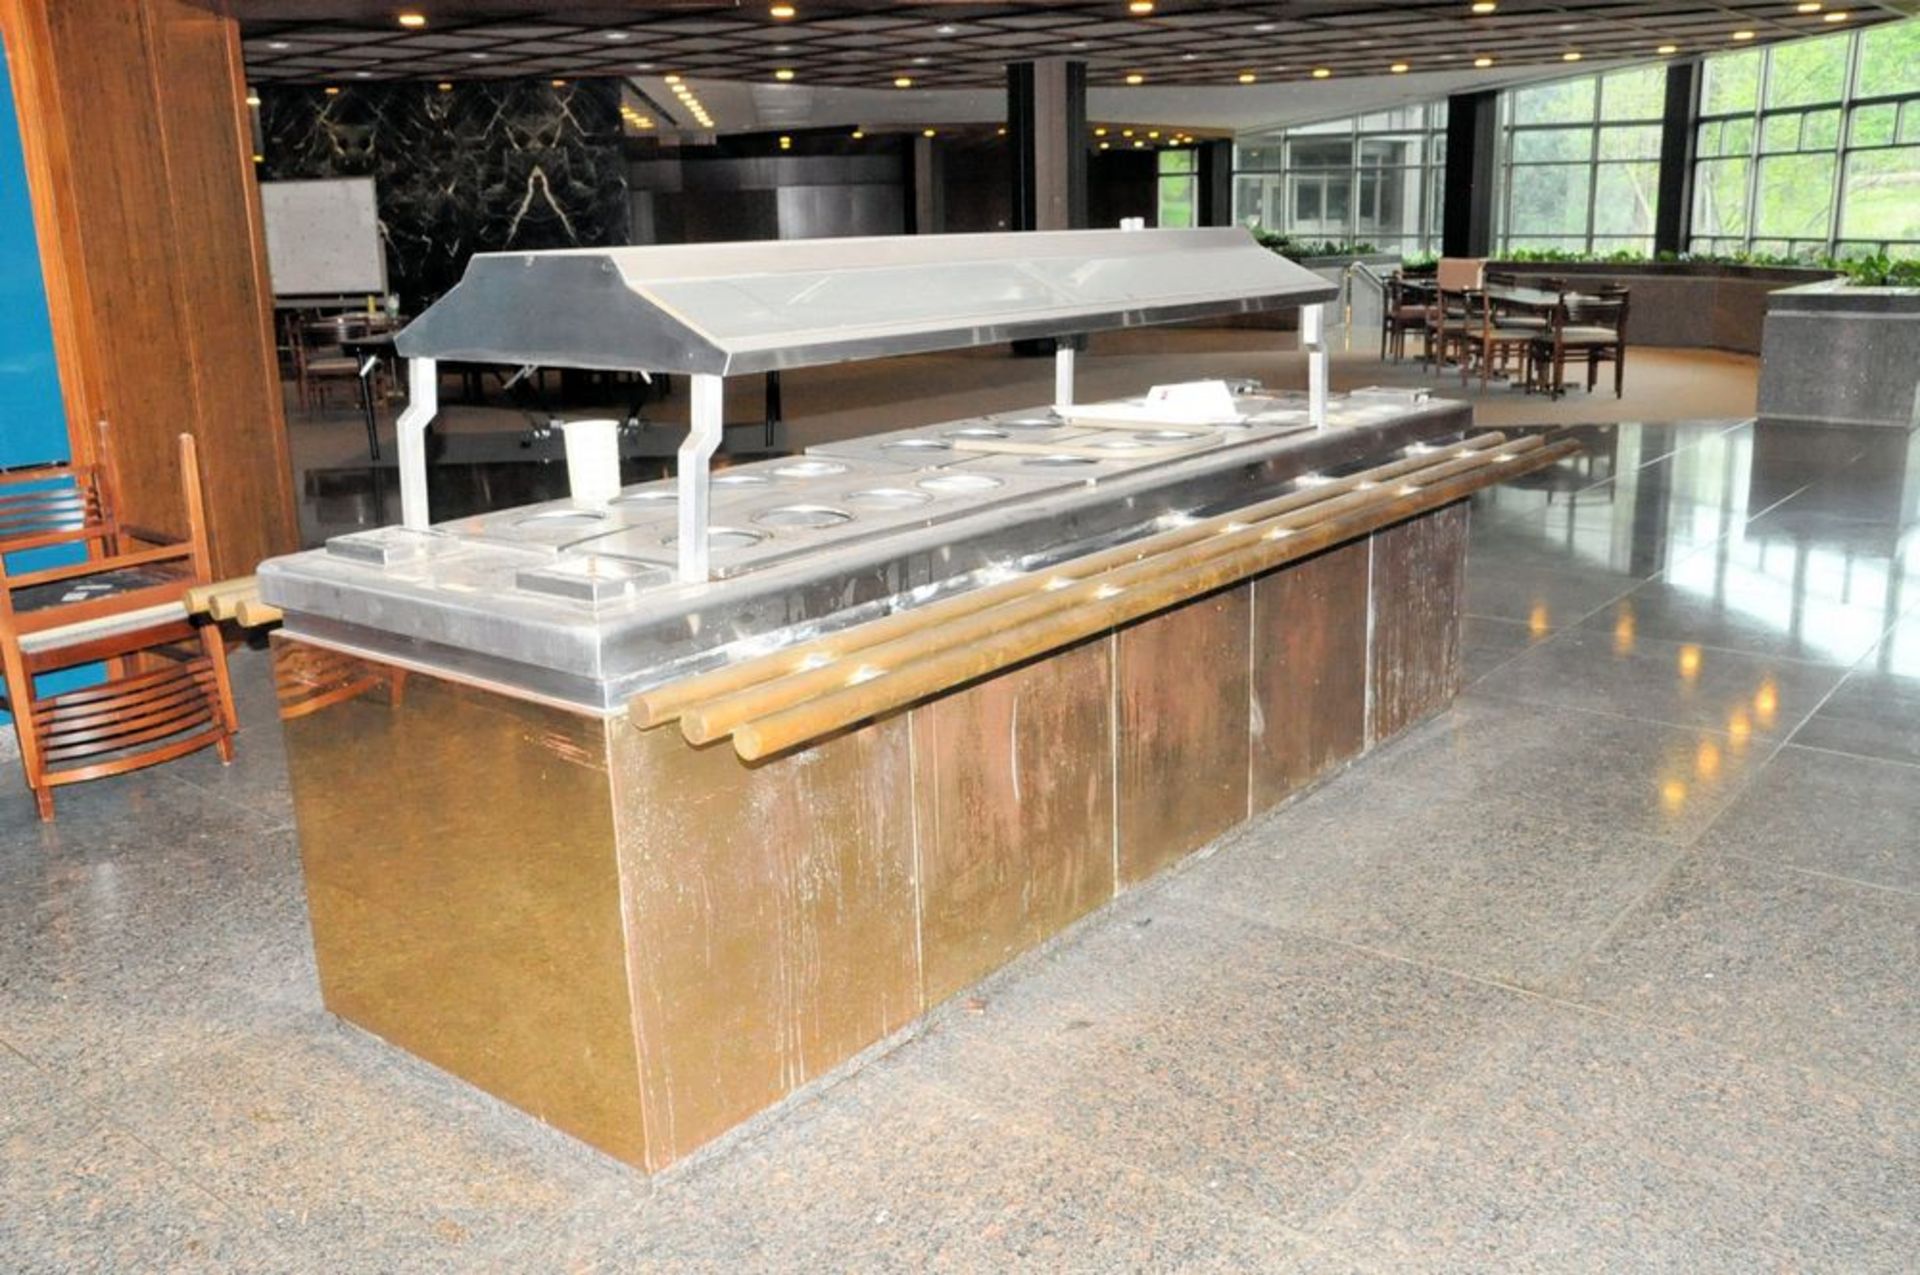 Refrigerated Stainless Steel Salad Bar, 3' x 10', 16-Food Compartments, 16-Silverware Holders,